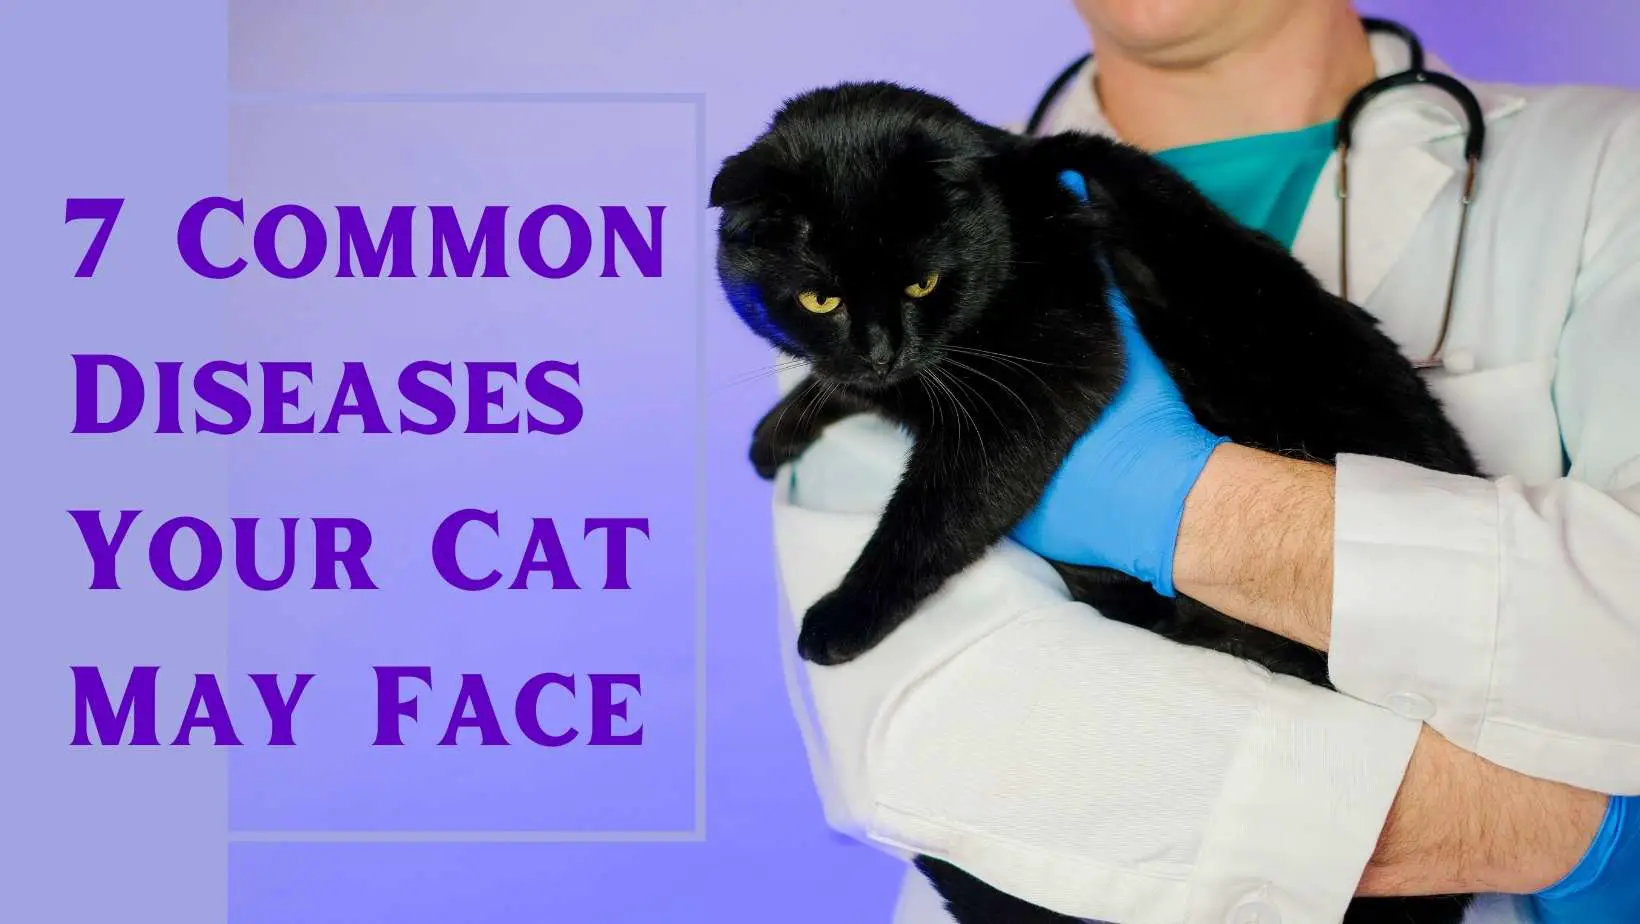 7 Common Diseases Your Cat May Face